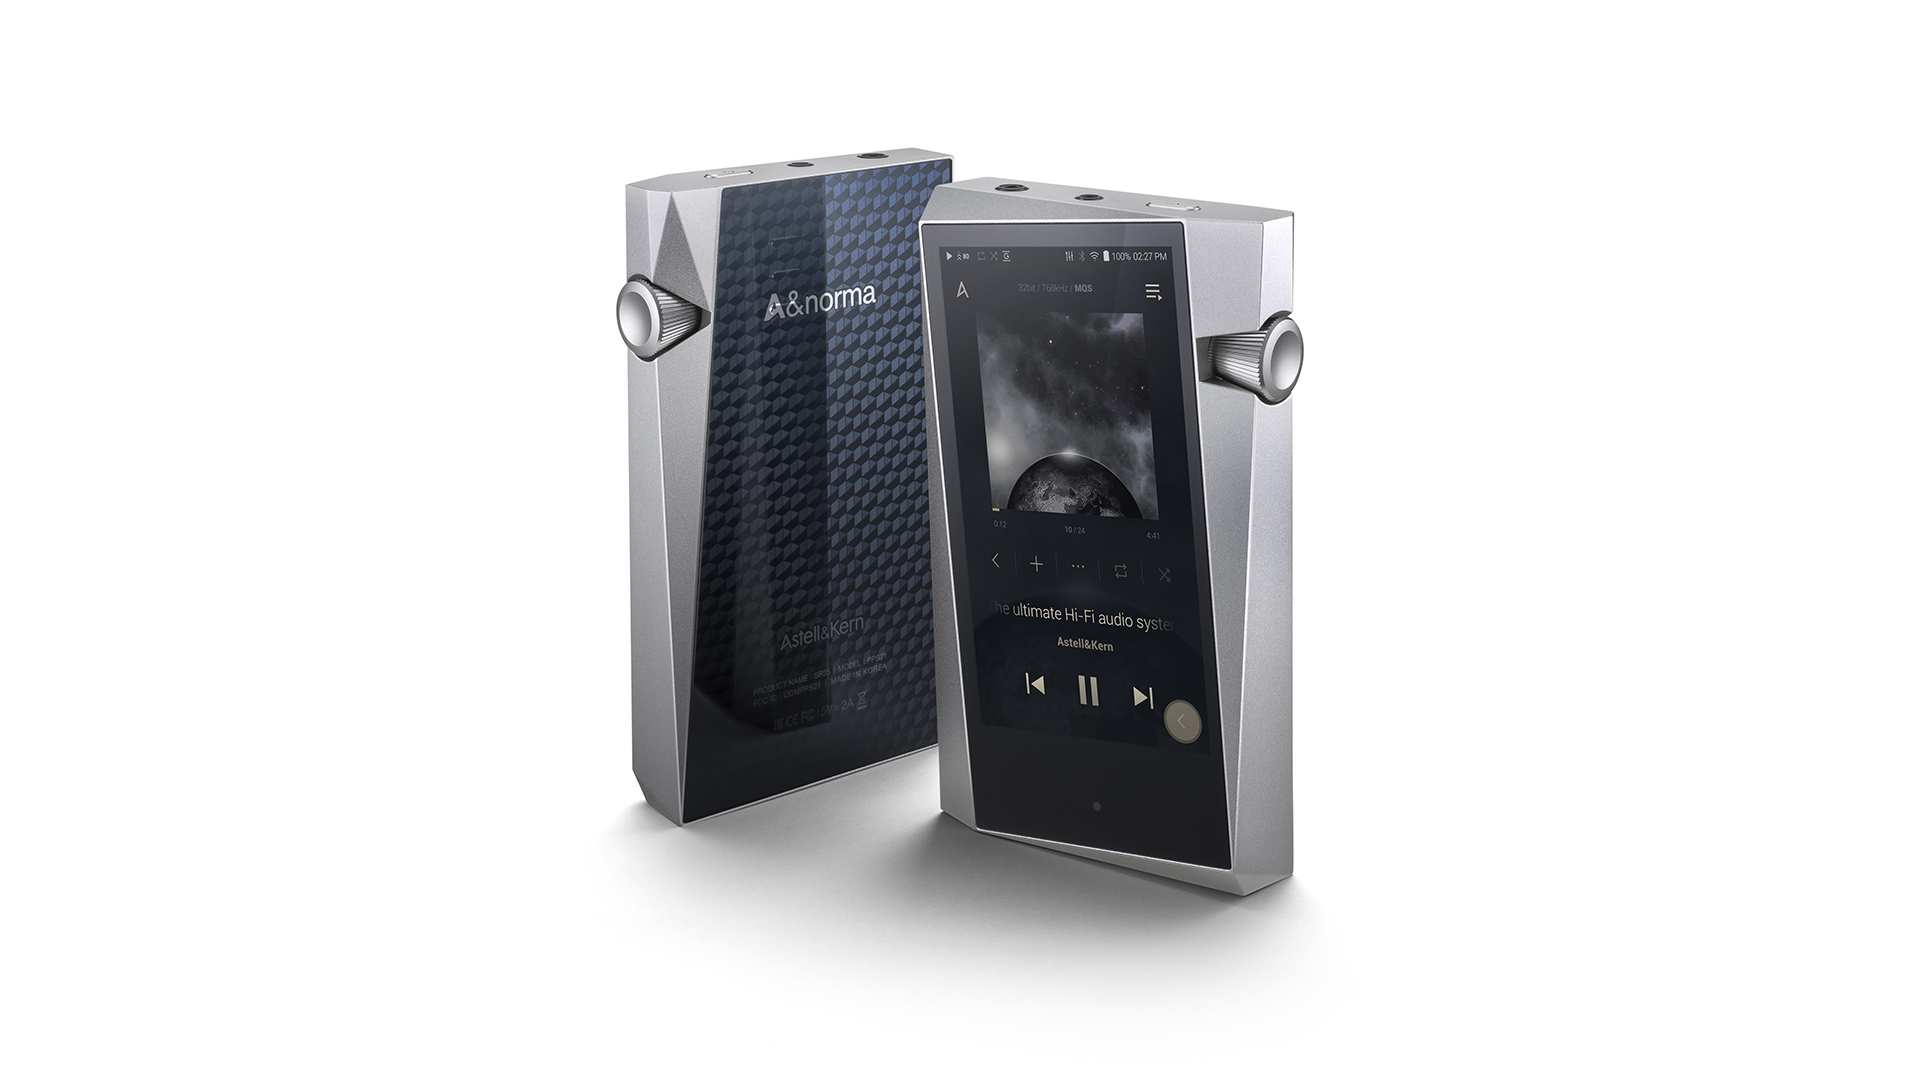 Astell & Kern A&norma SR25 review | What Hi-Fi?